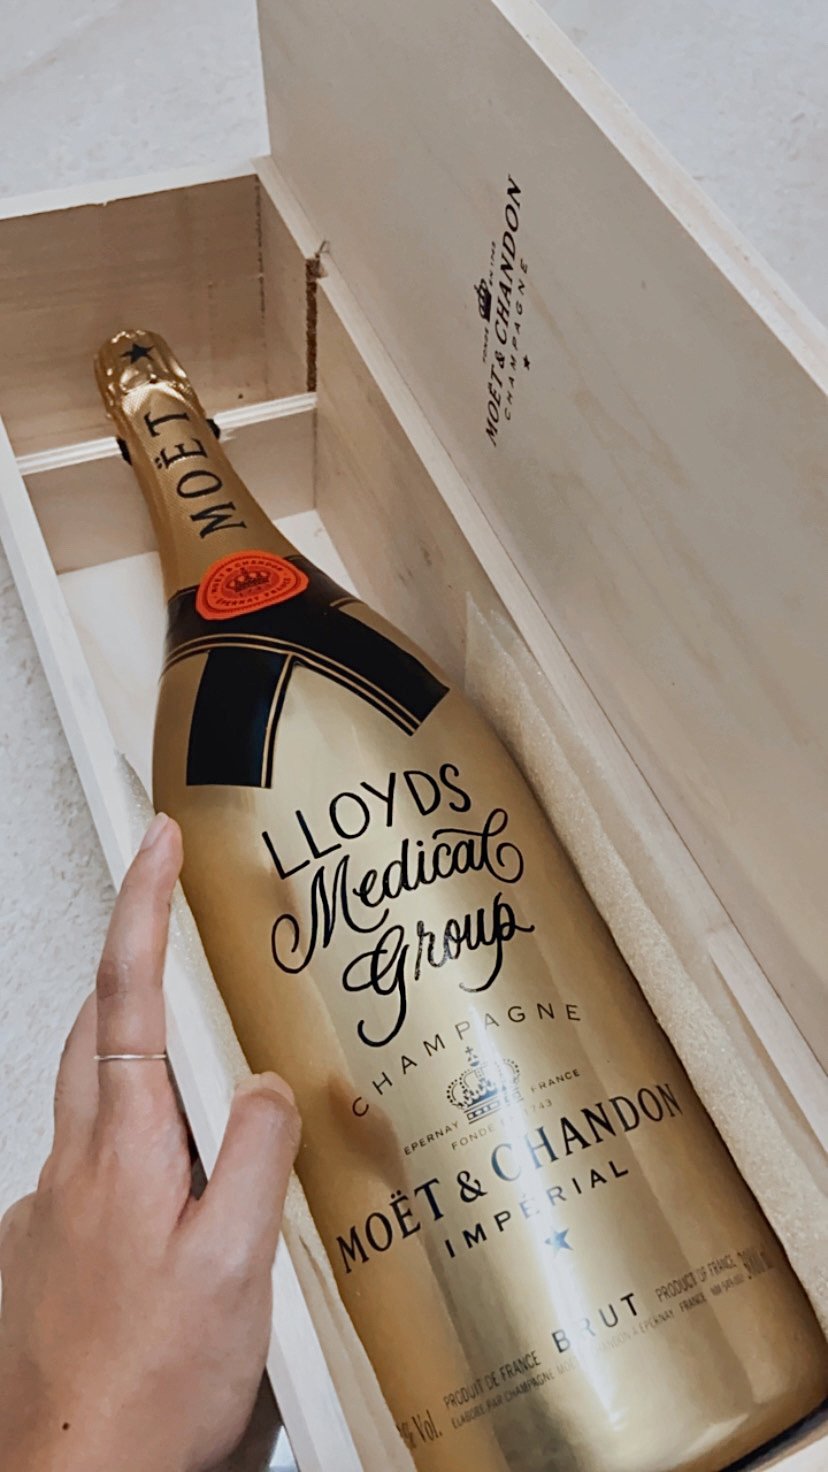 LLOYDS Medical Group | Custom Calligraphy Message on Moet & Chandon Champagne